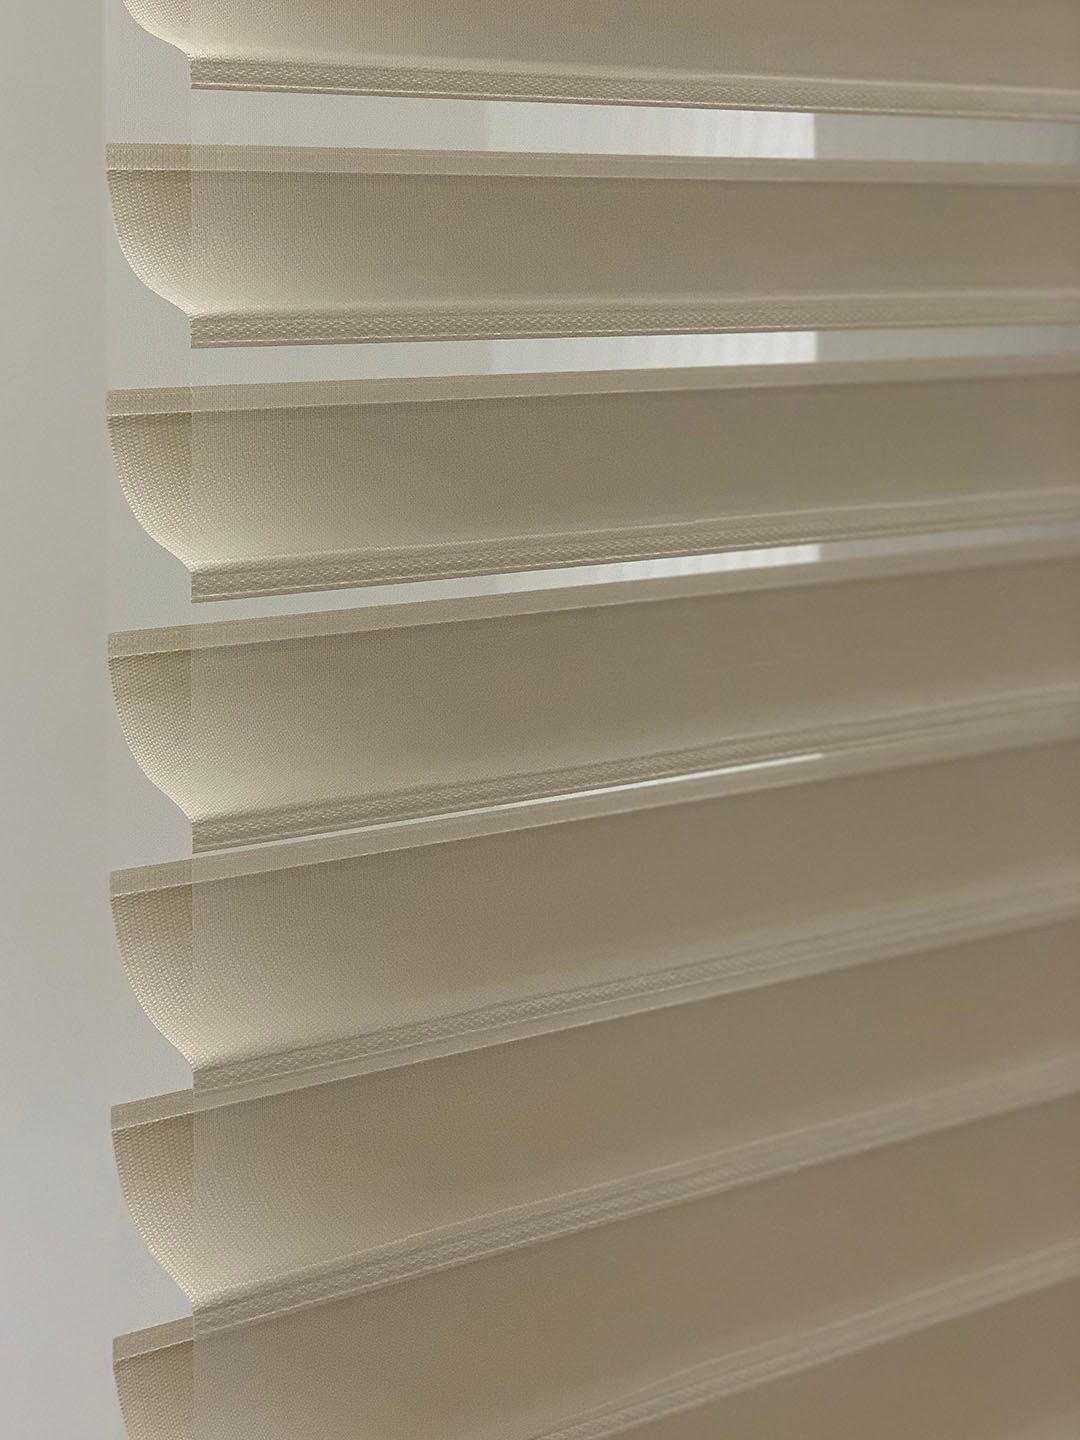 Close up of Silhouette: tri-shade window blinds